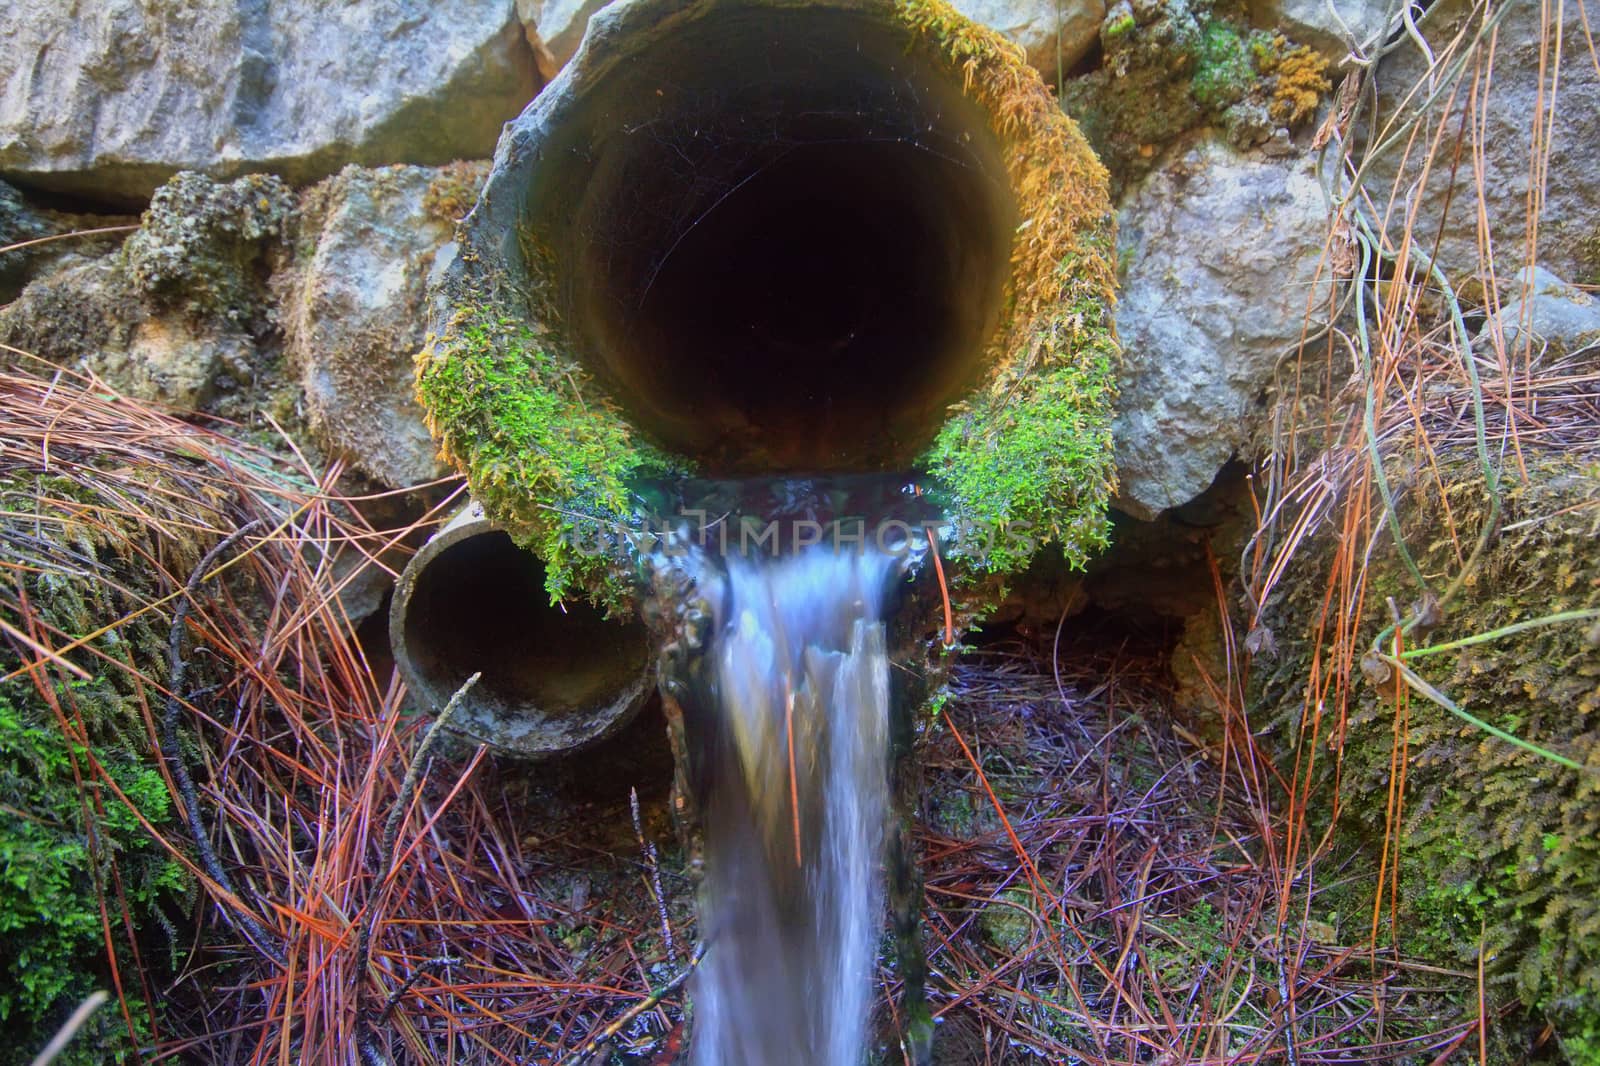 Two pipes laid under the road for water drainage. One mossy pipe flowing clean water.